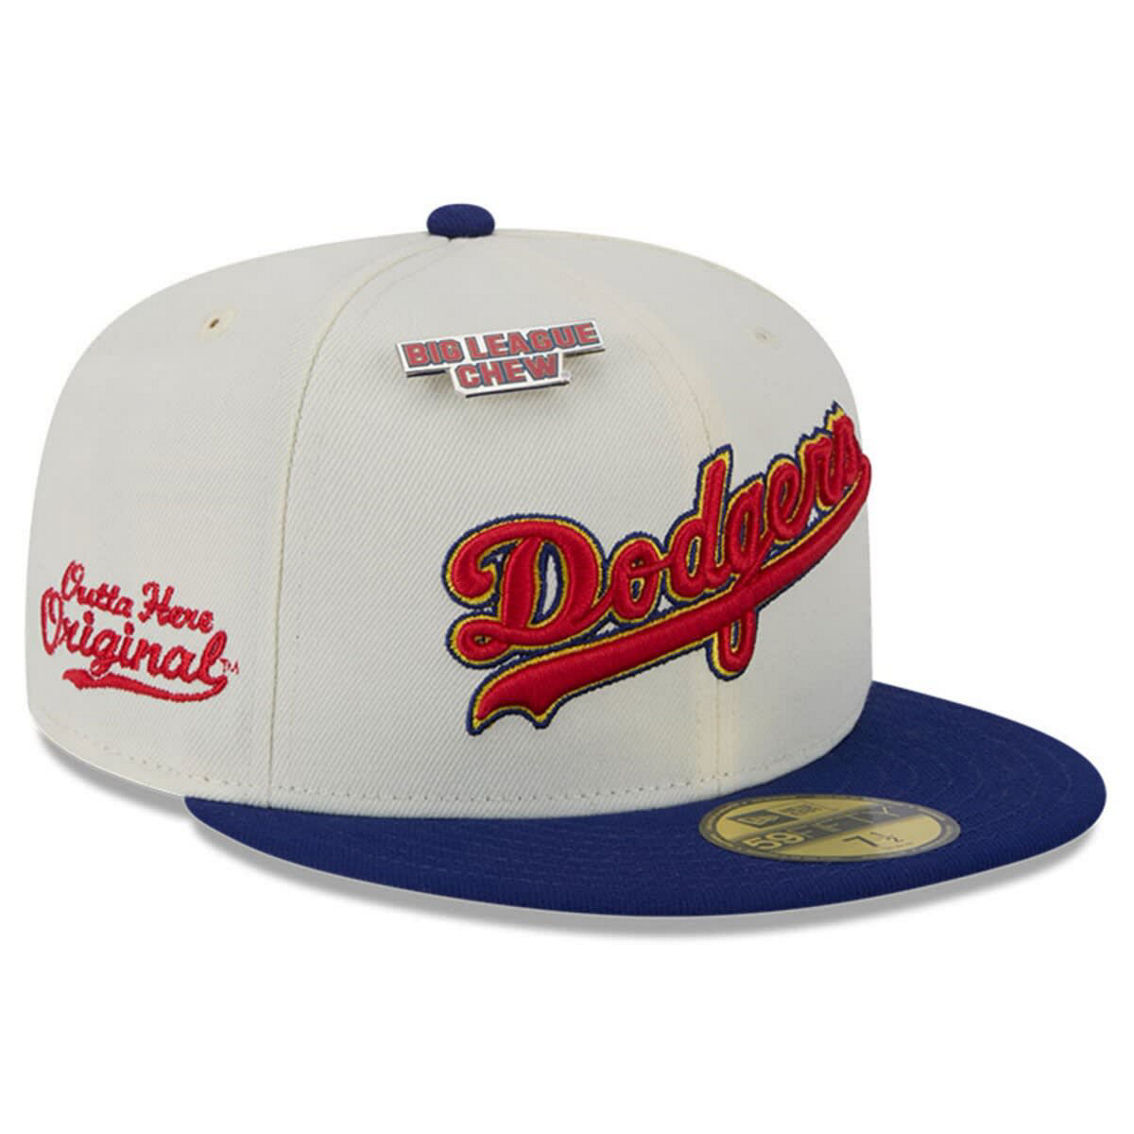 New Era Men's White Los Angeles Dodgers Big League Chew Original 59FIFTY Fitted Hat - Image 2 of 4